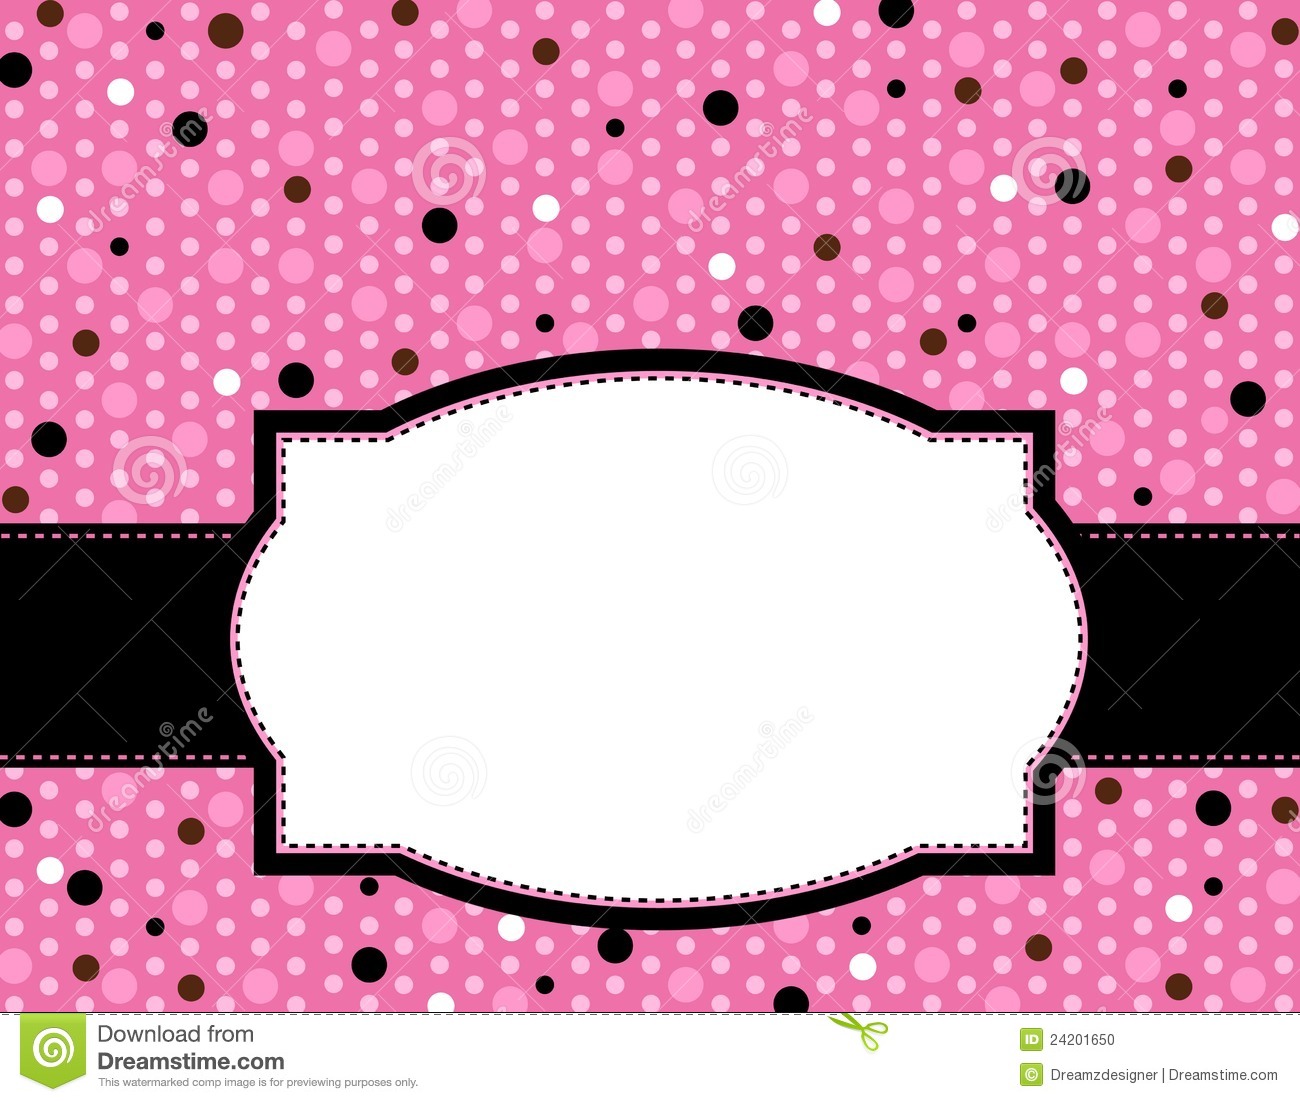 Cute Polka Dots Design With Pink Ribbon And Doodle Frame   Border